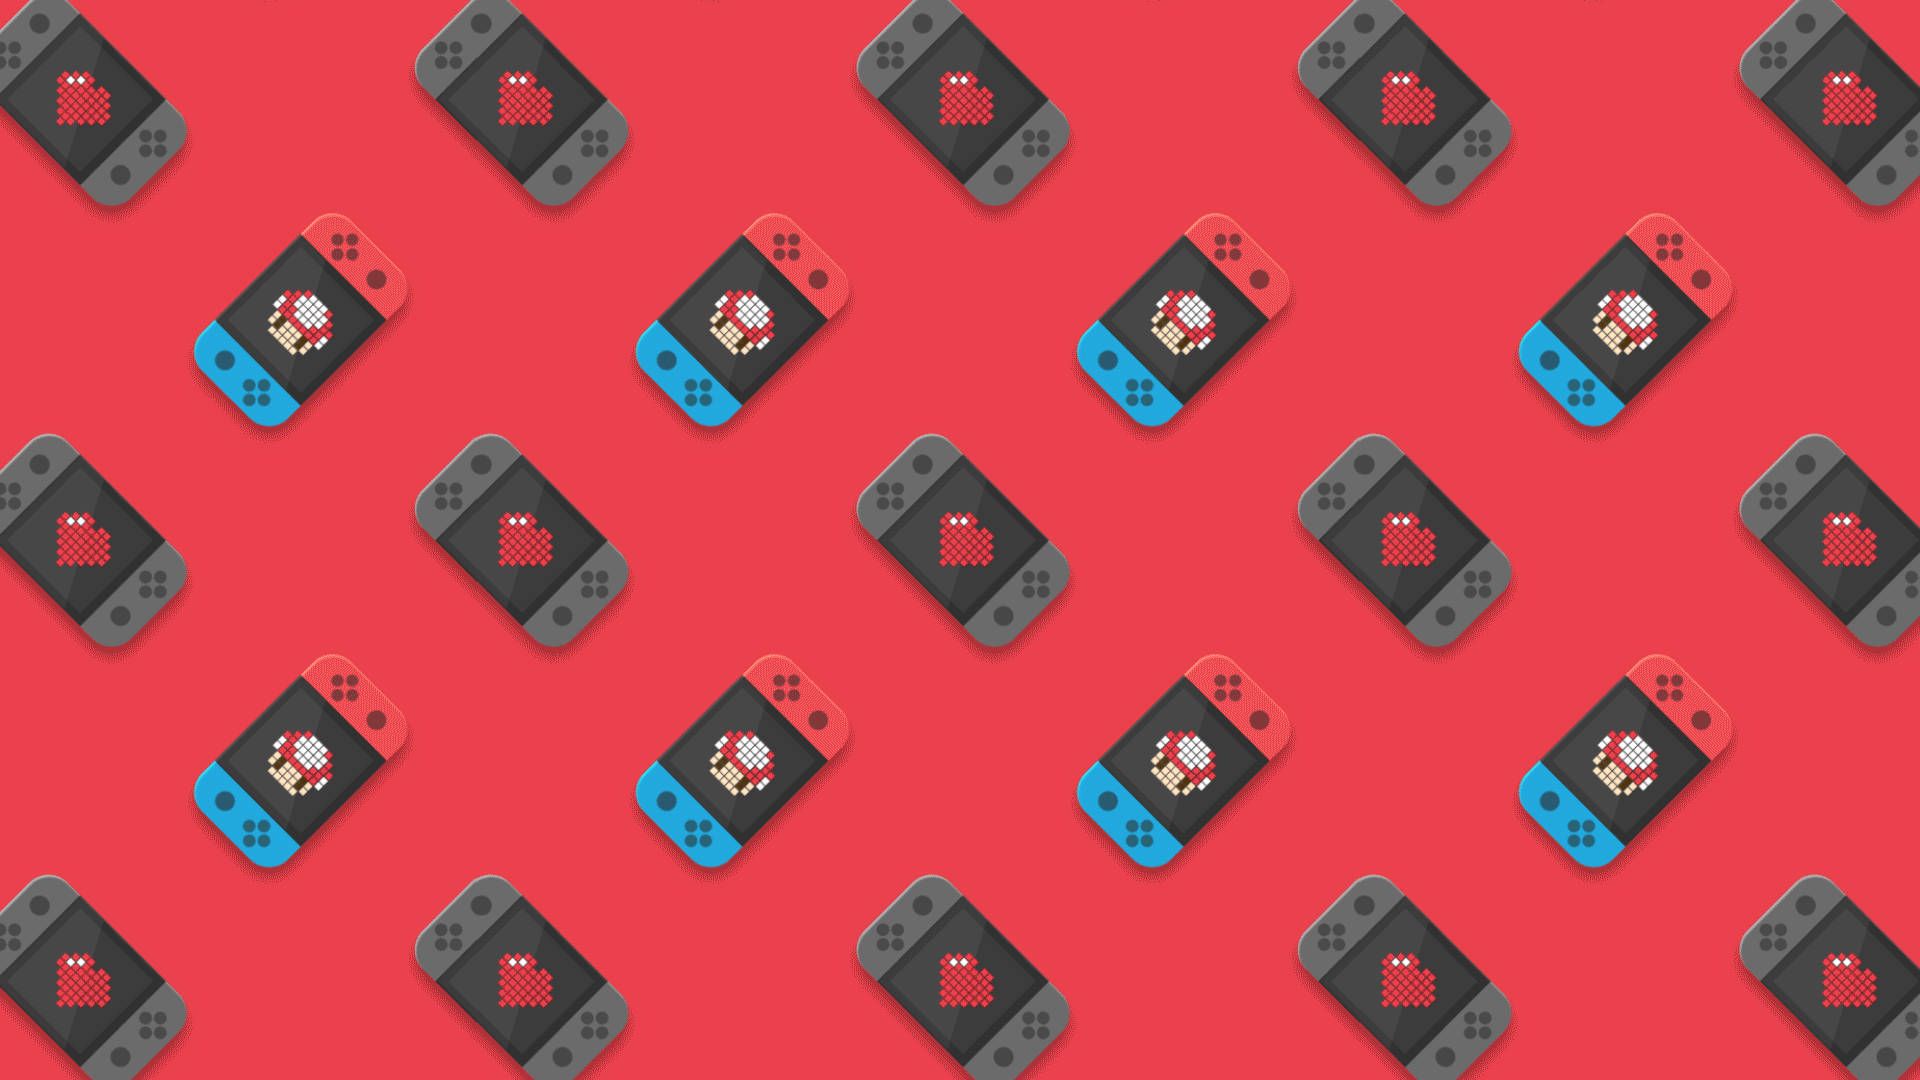 Nintendo Switch and Super Mario pattern on a red background - Nintendo